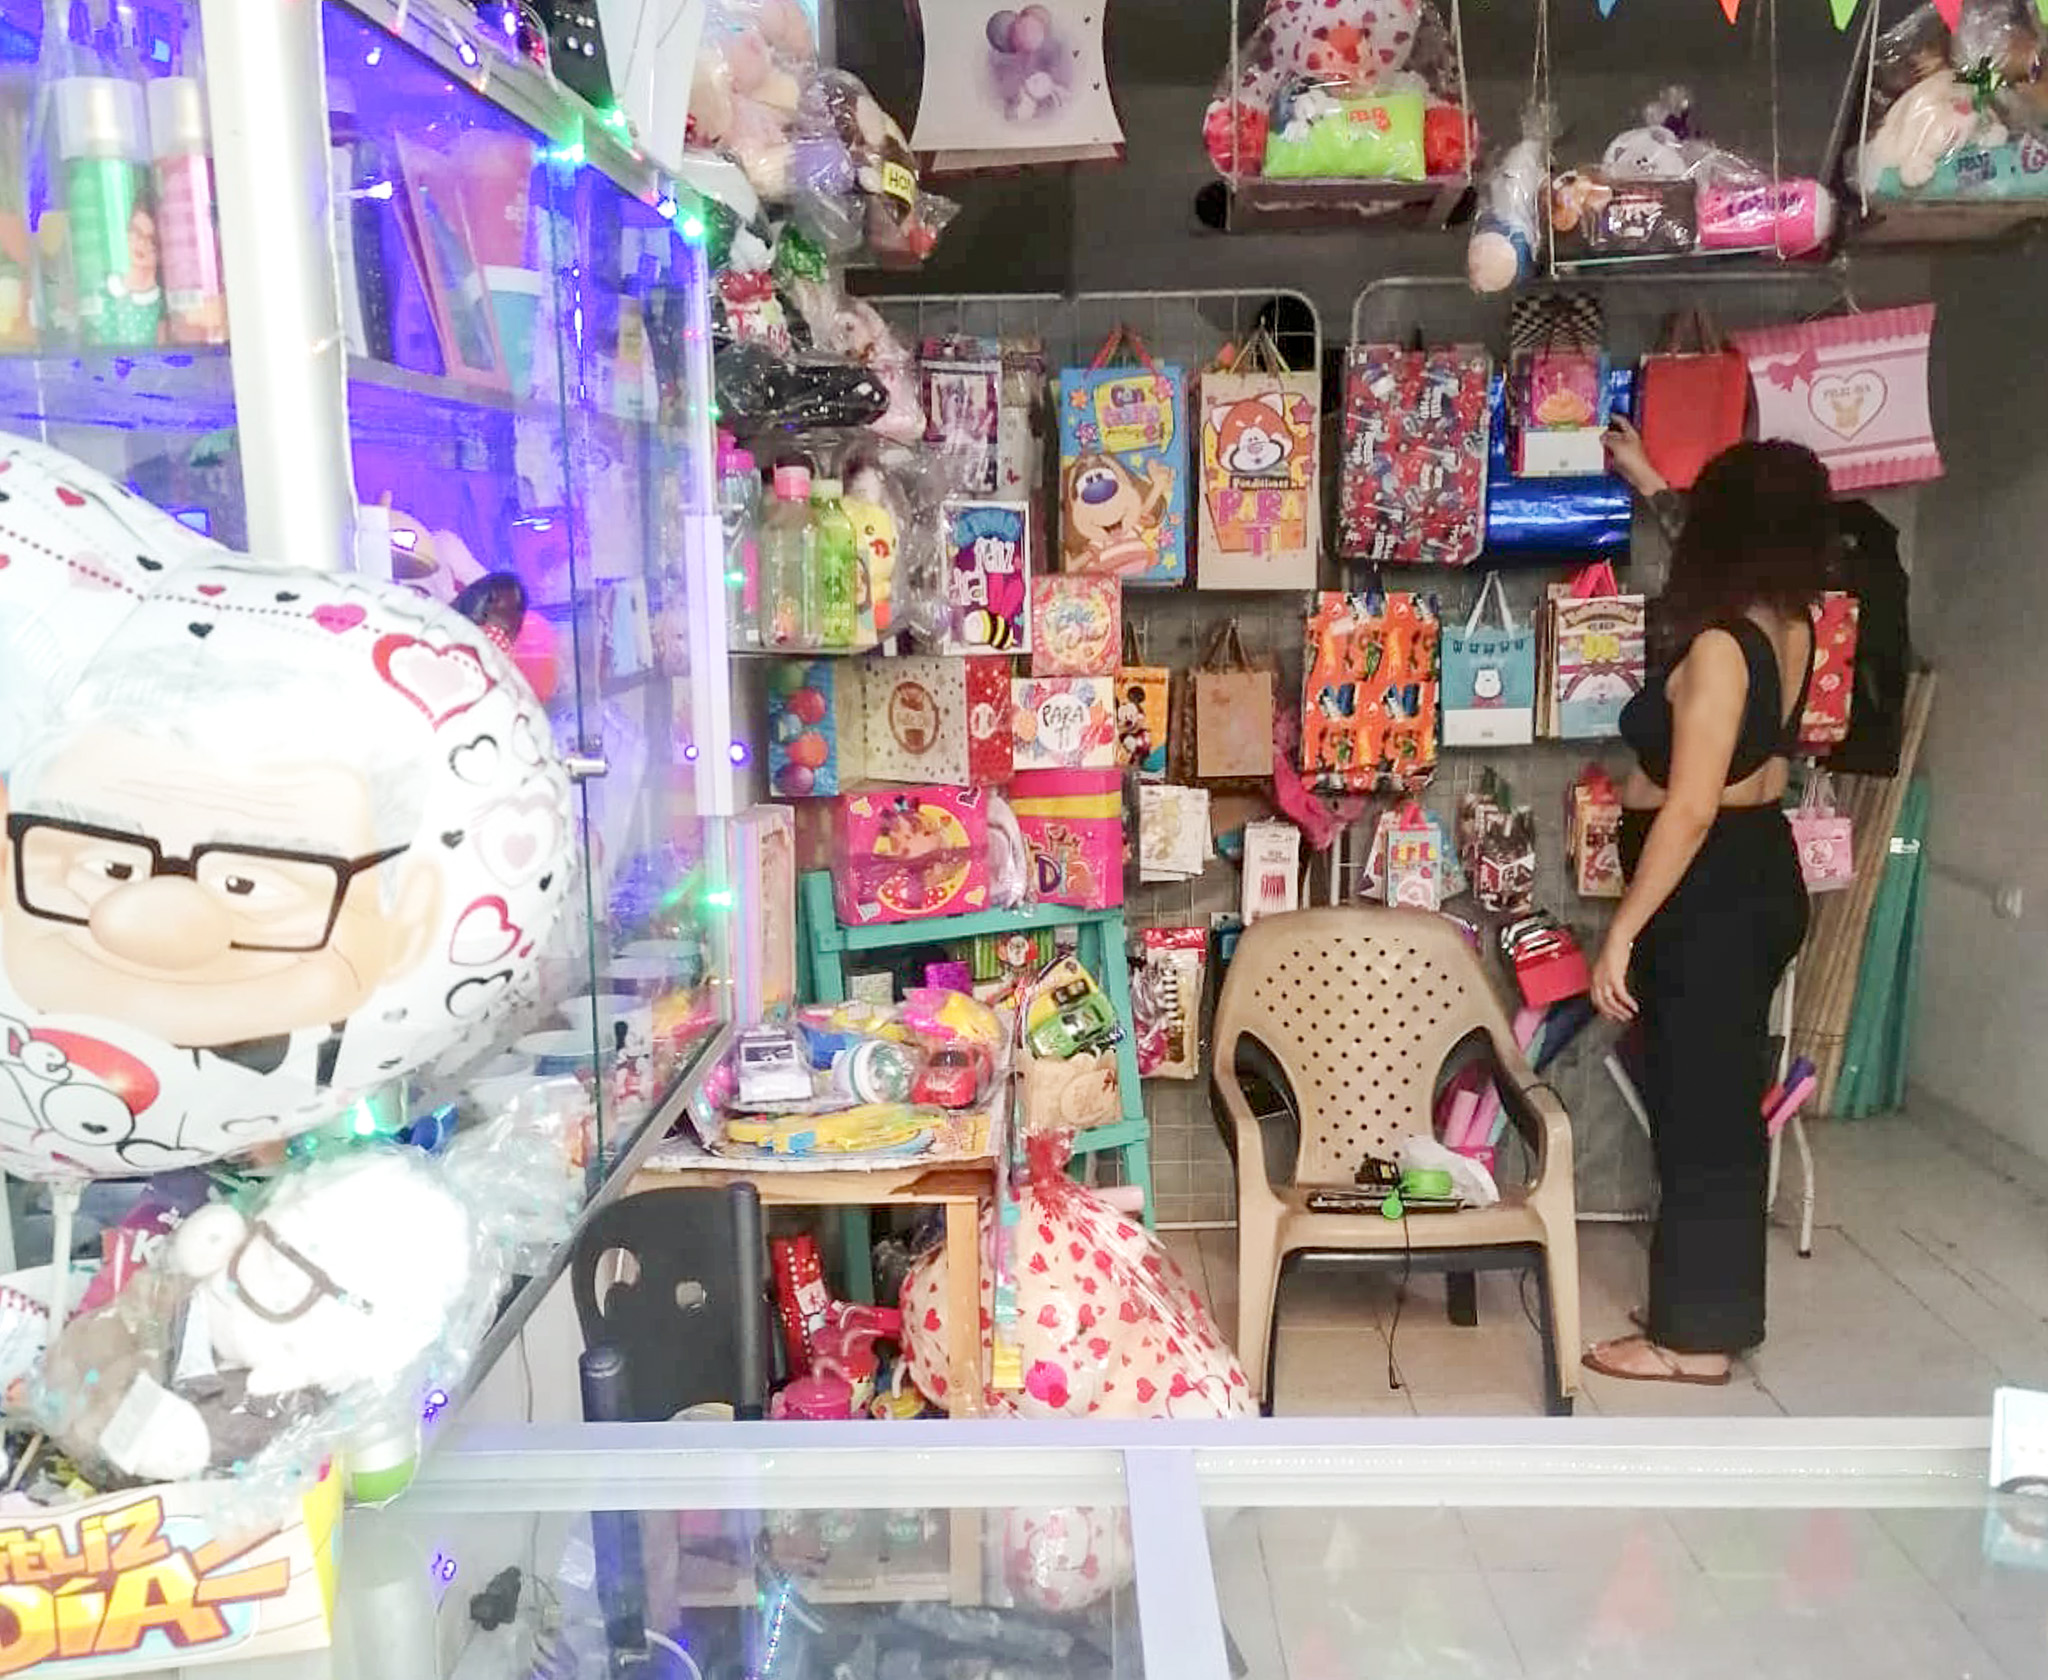 a woman who is facing away from the camera looks at shelves full of gifts and stationery